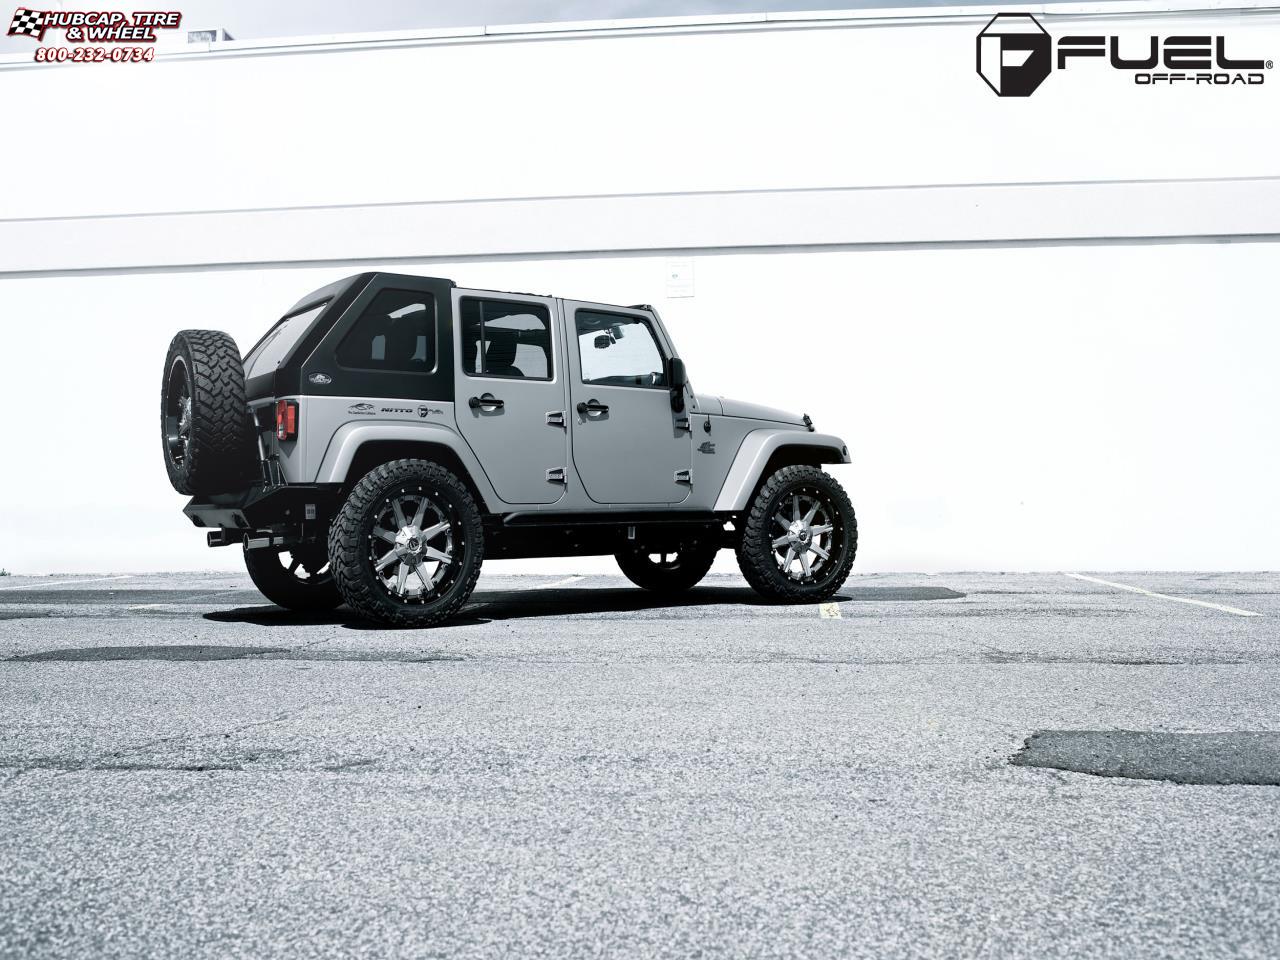 vehicle gallery/jeep wrangler fuel nutz d251 22X10  Matte Black & Milled wheels and rims